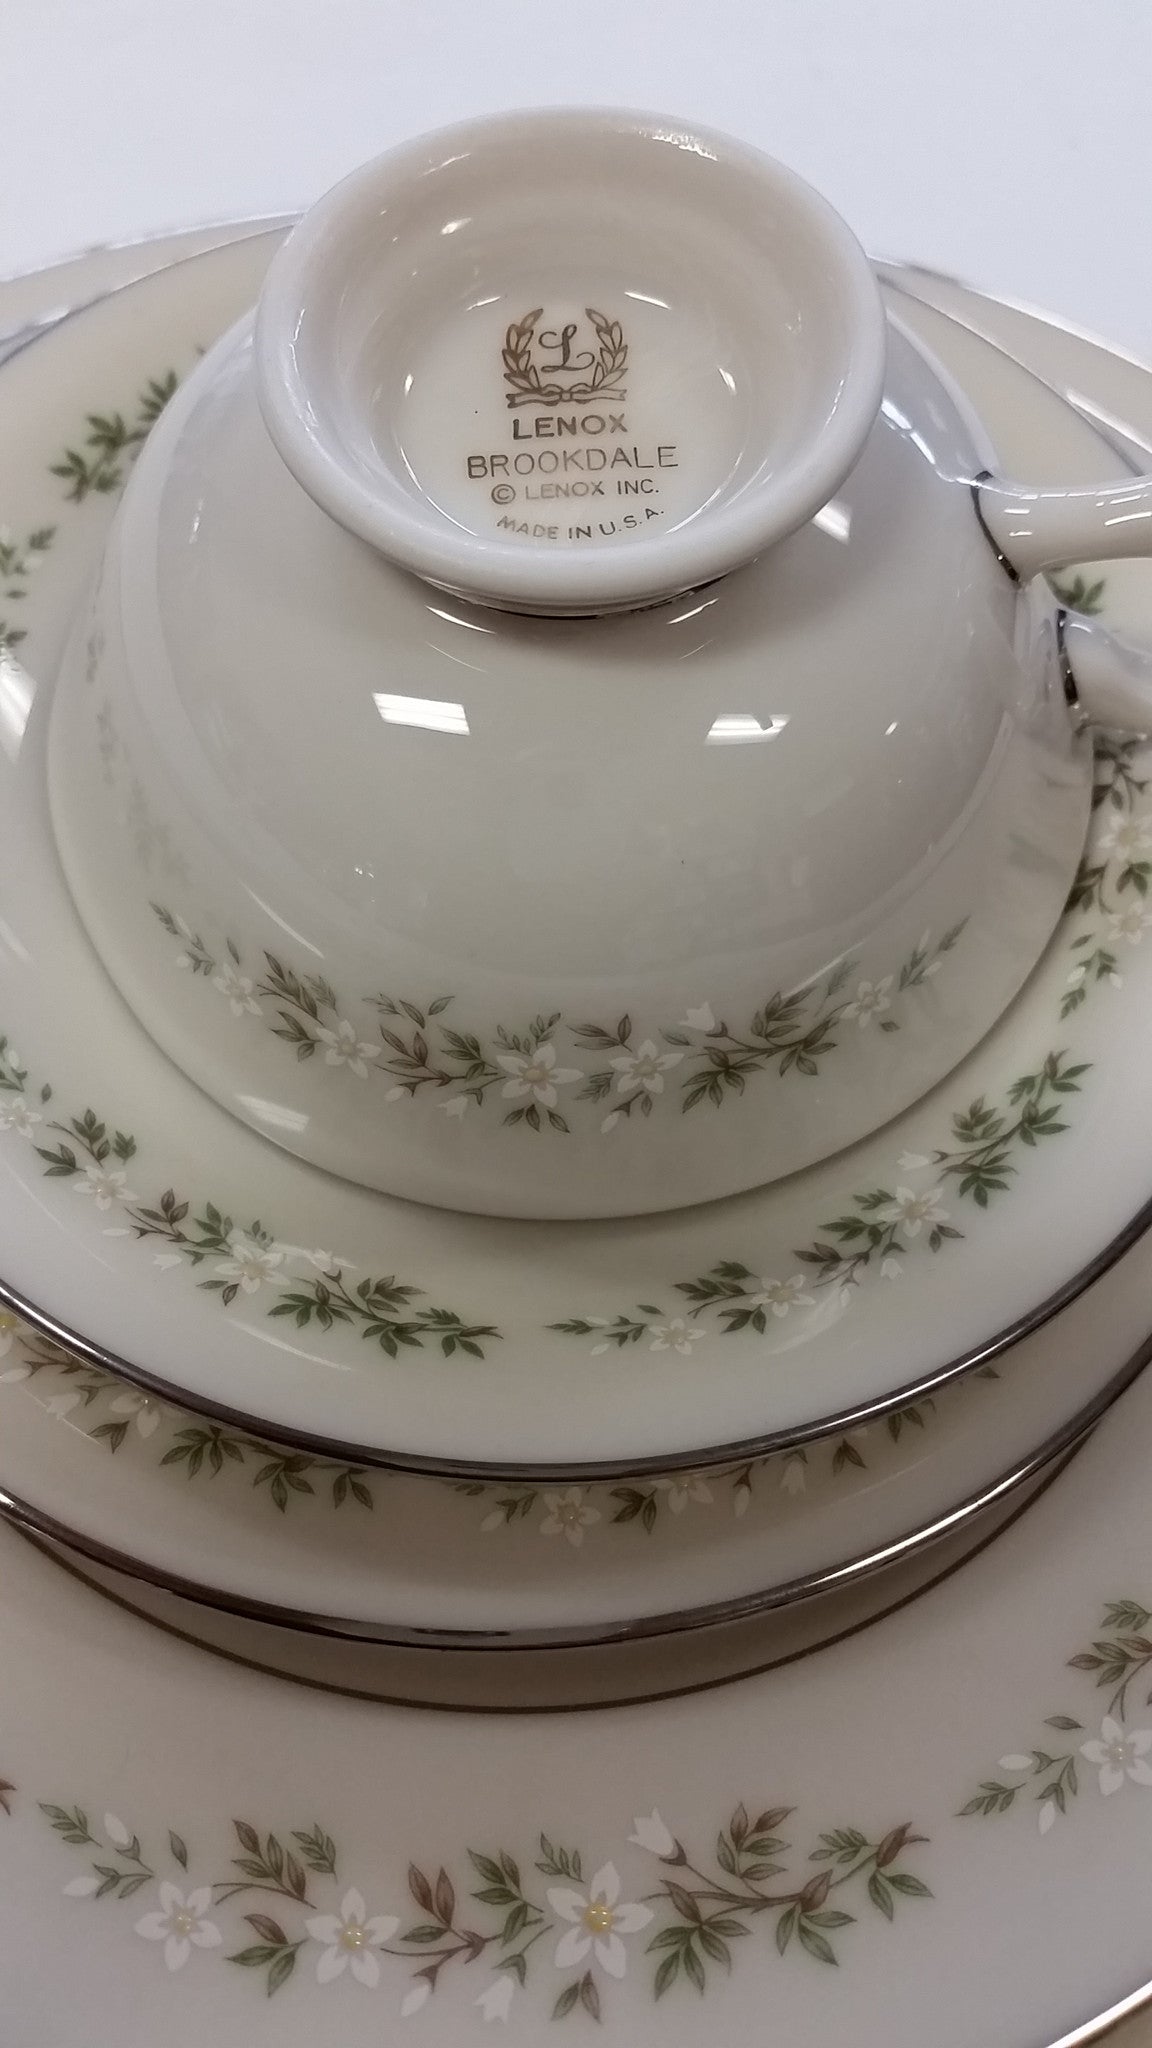 Lenox Brookdale China 5 piece setting - O'Rourke crystal awards & gifts abp cut glass